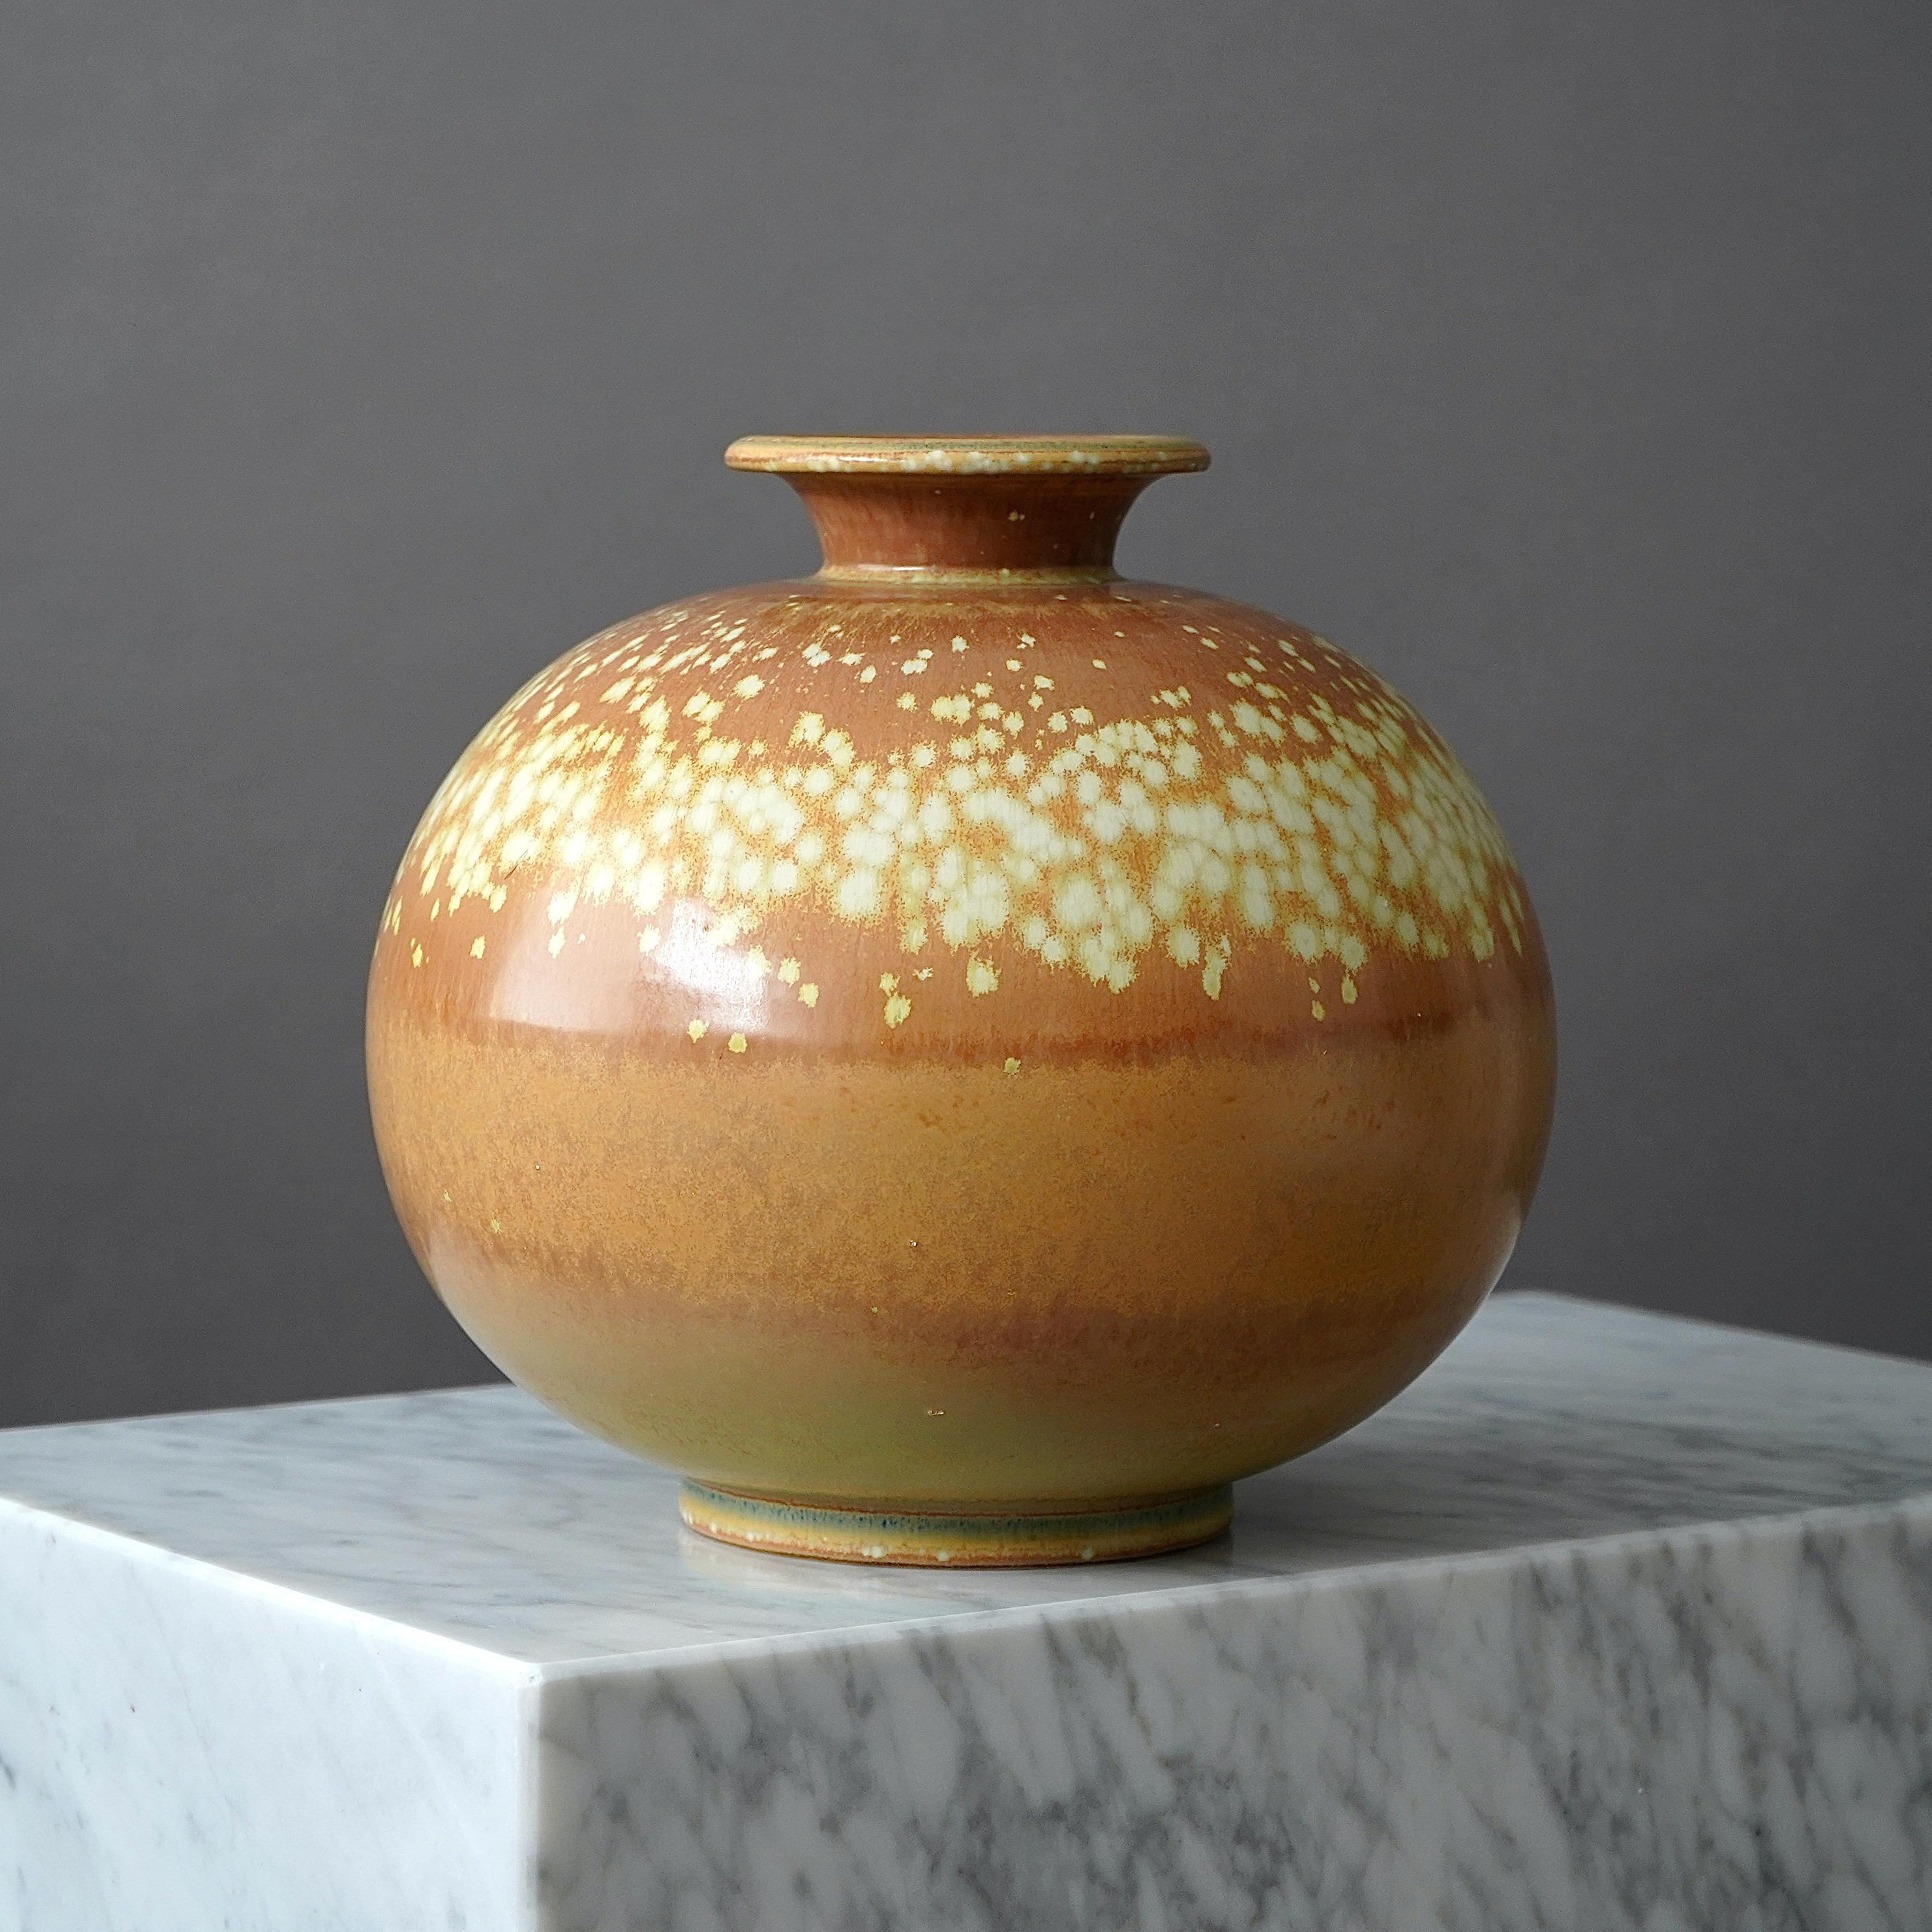 20th Century Unique Large Stoneware Vase by Gunnar Nylund for Rorstrand, Sweden, 1940s For Sale